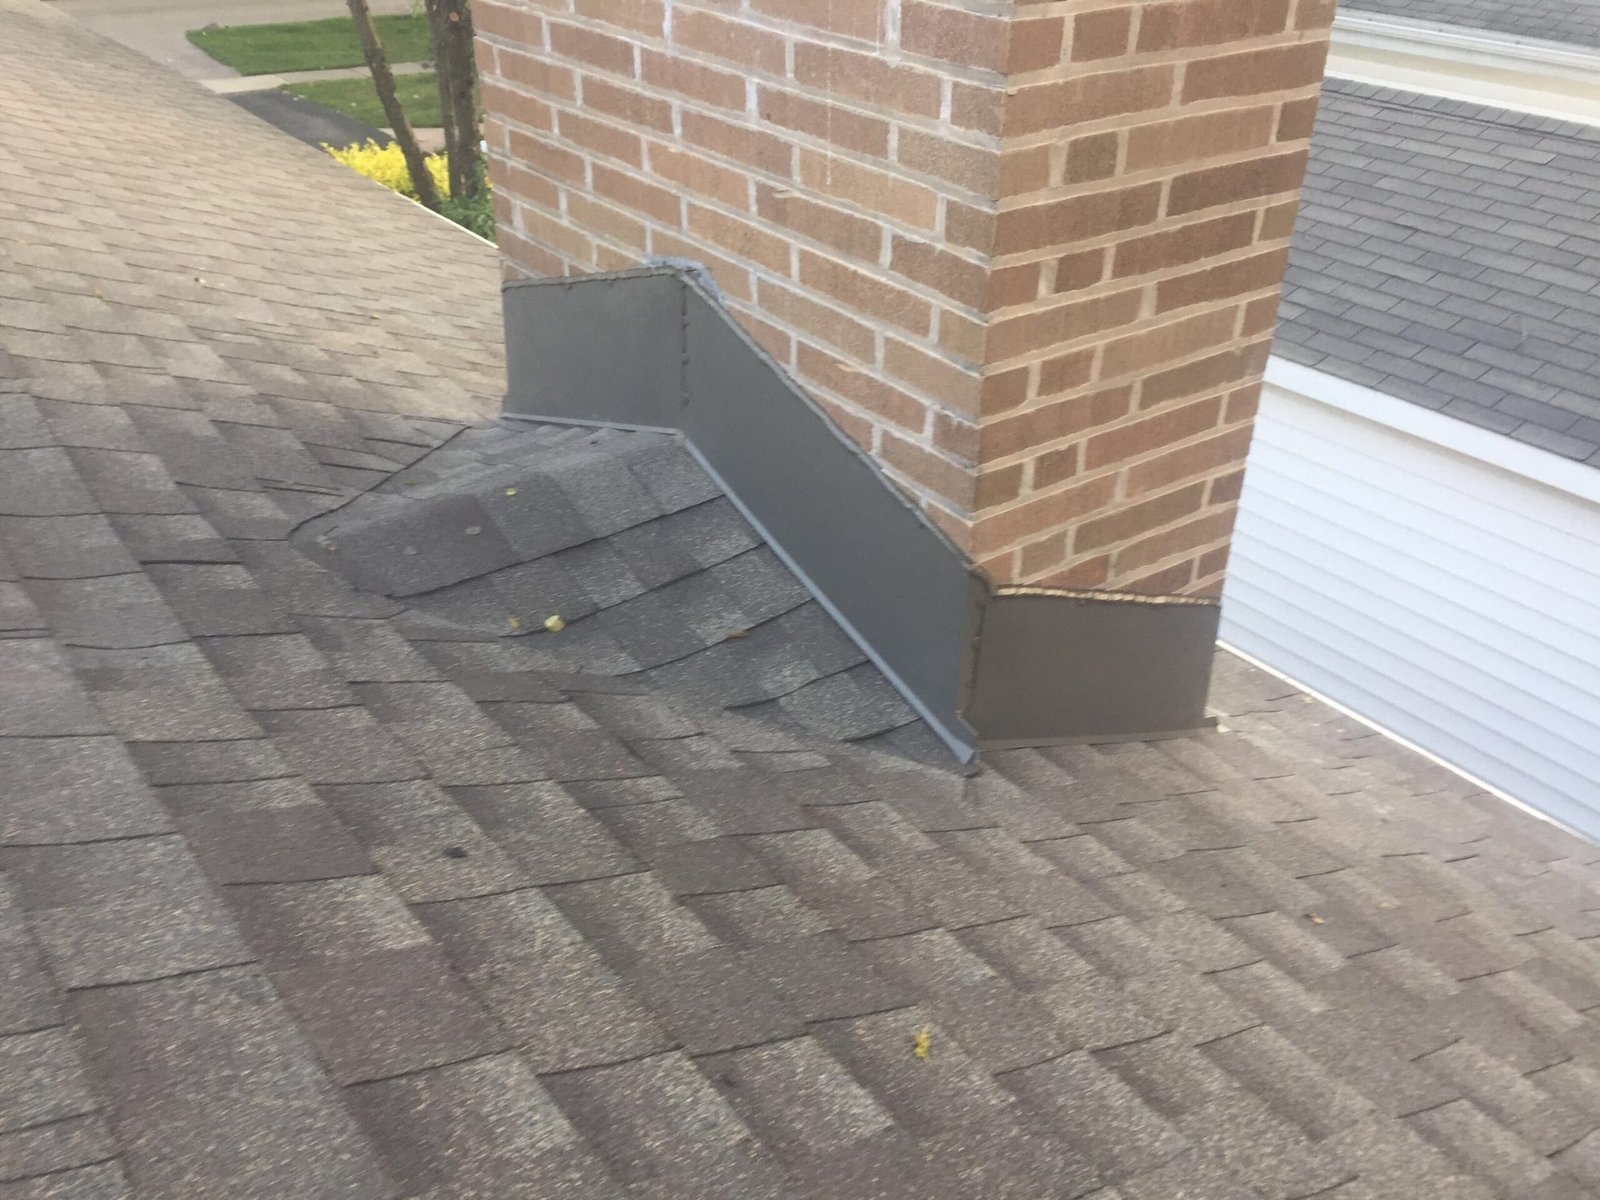 Get your roof inspected Chicagoland (847) 827-1605